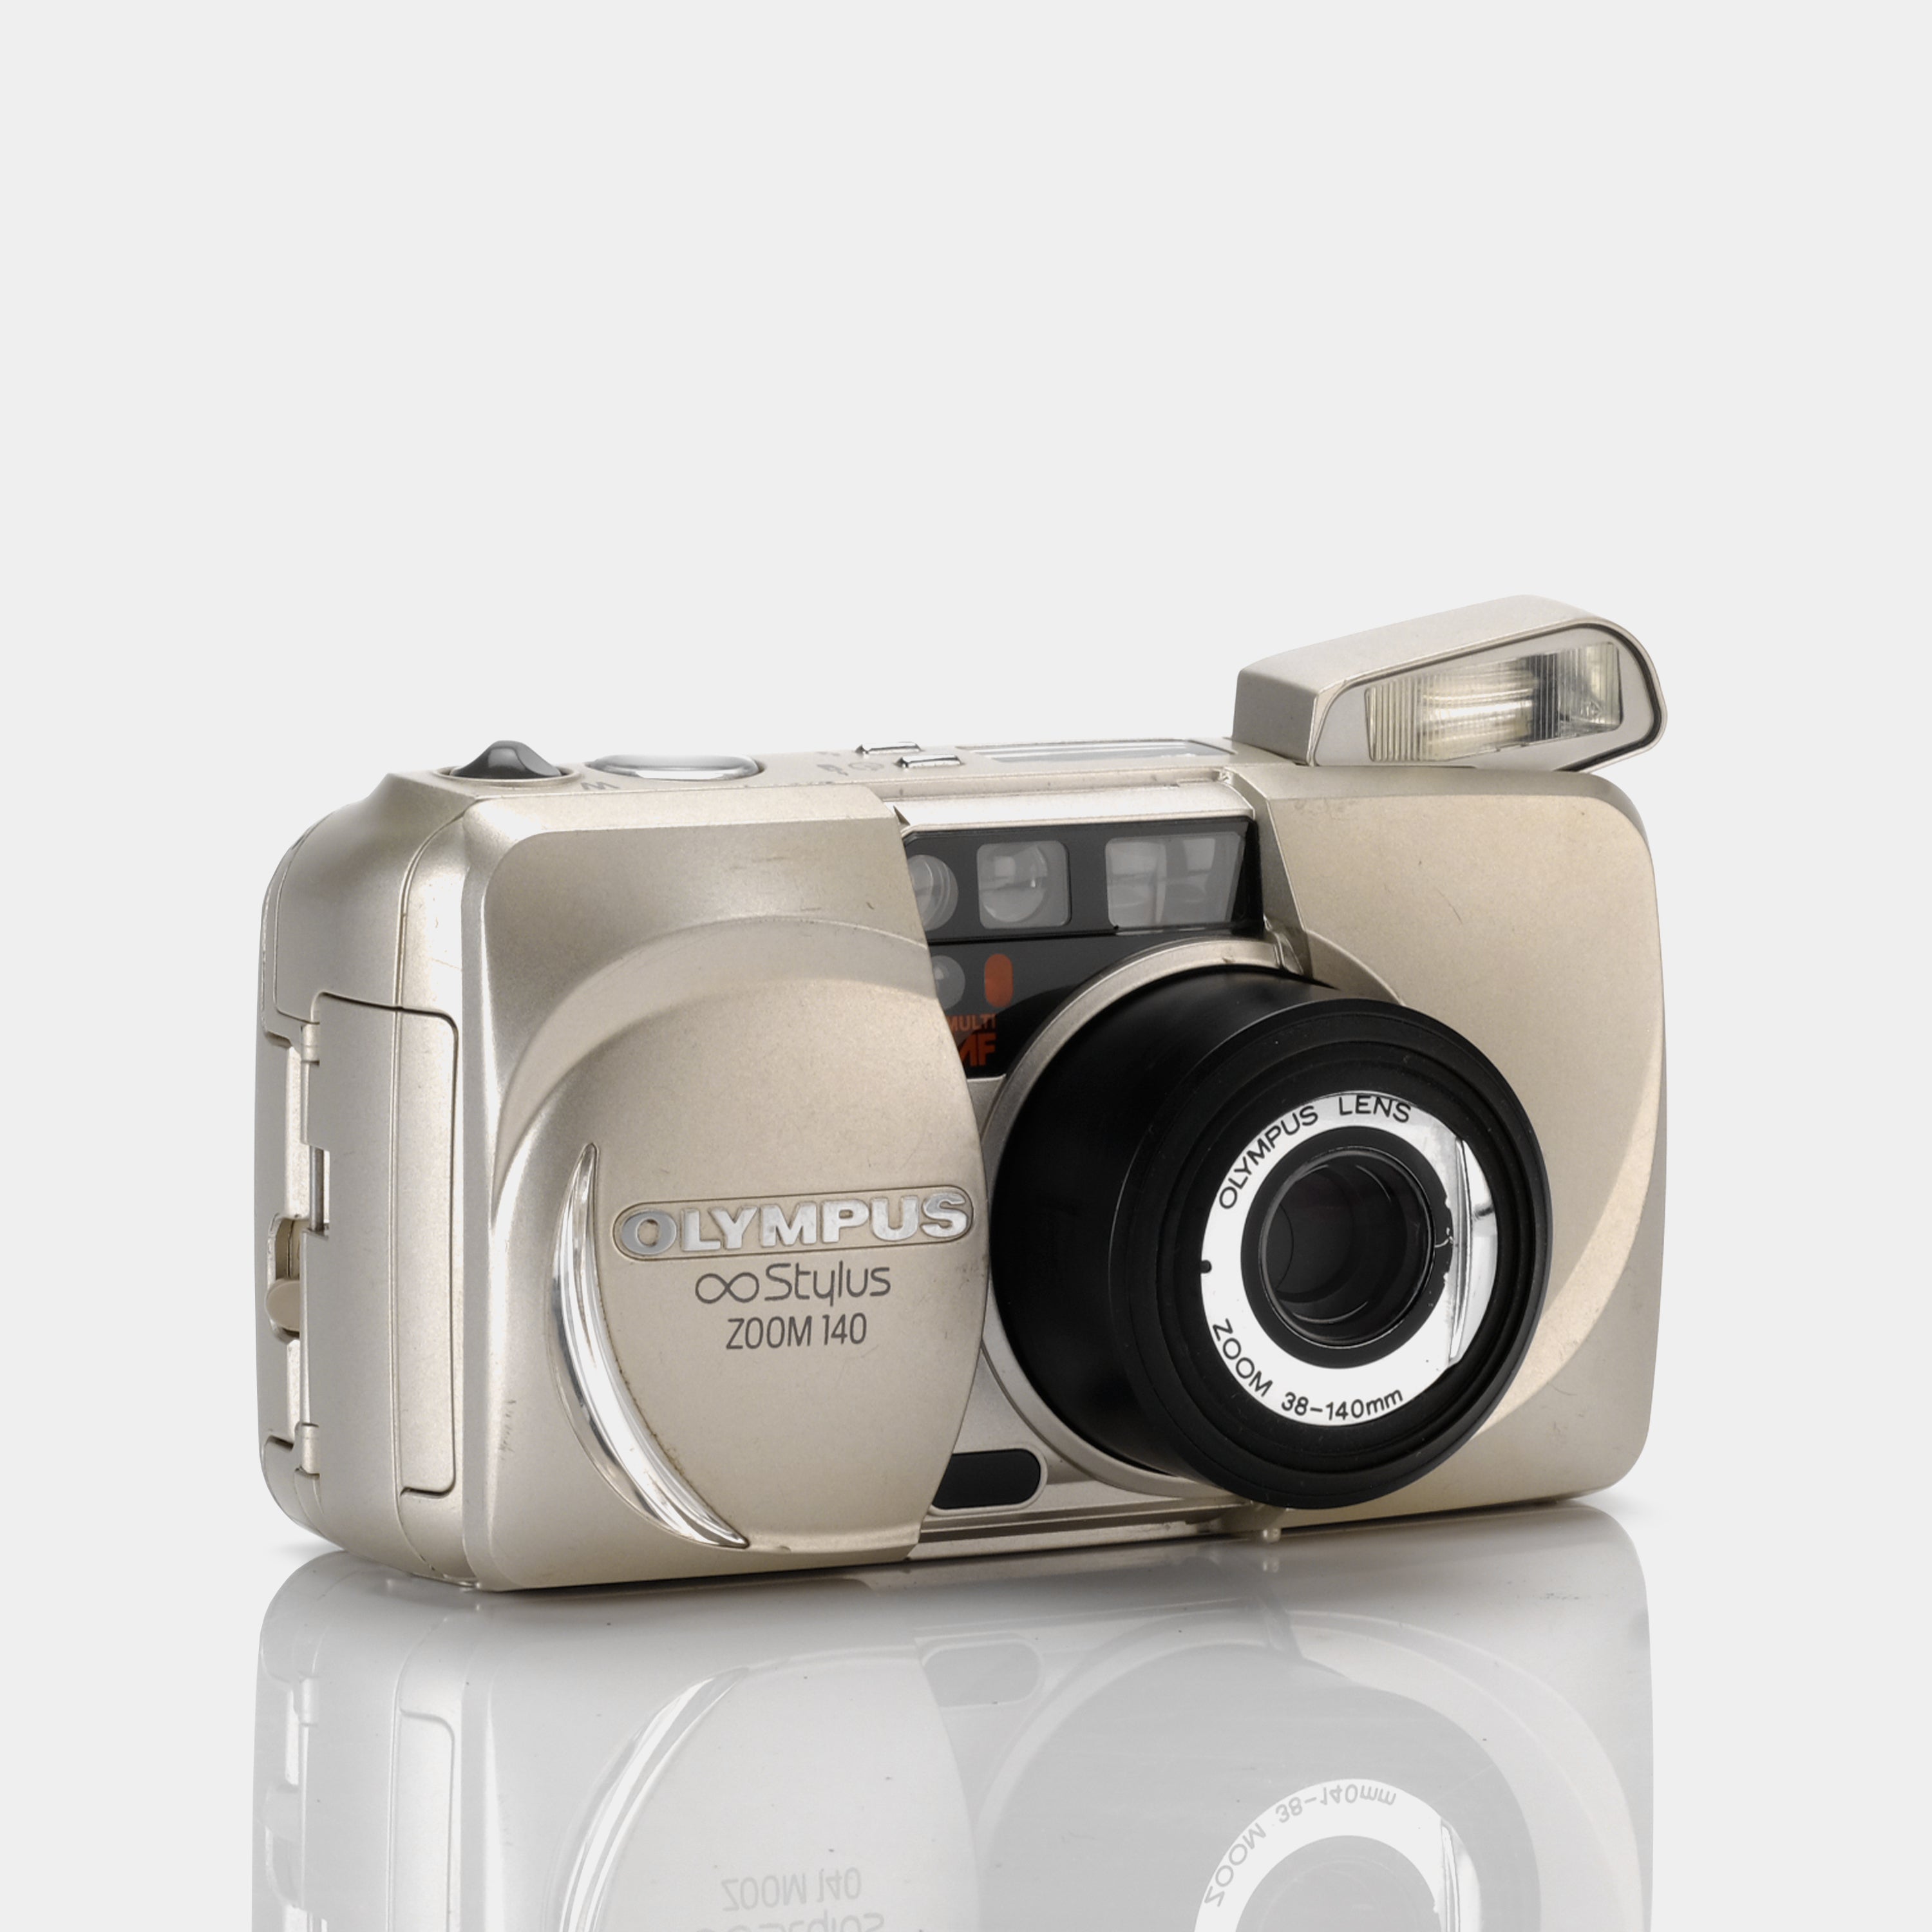 Olympus ∞ Infinity Stylus Zoom 140 35mm Point and Shoot Film Camera